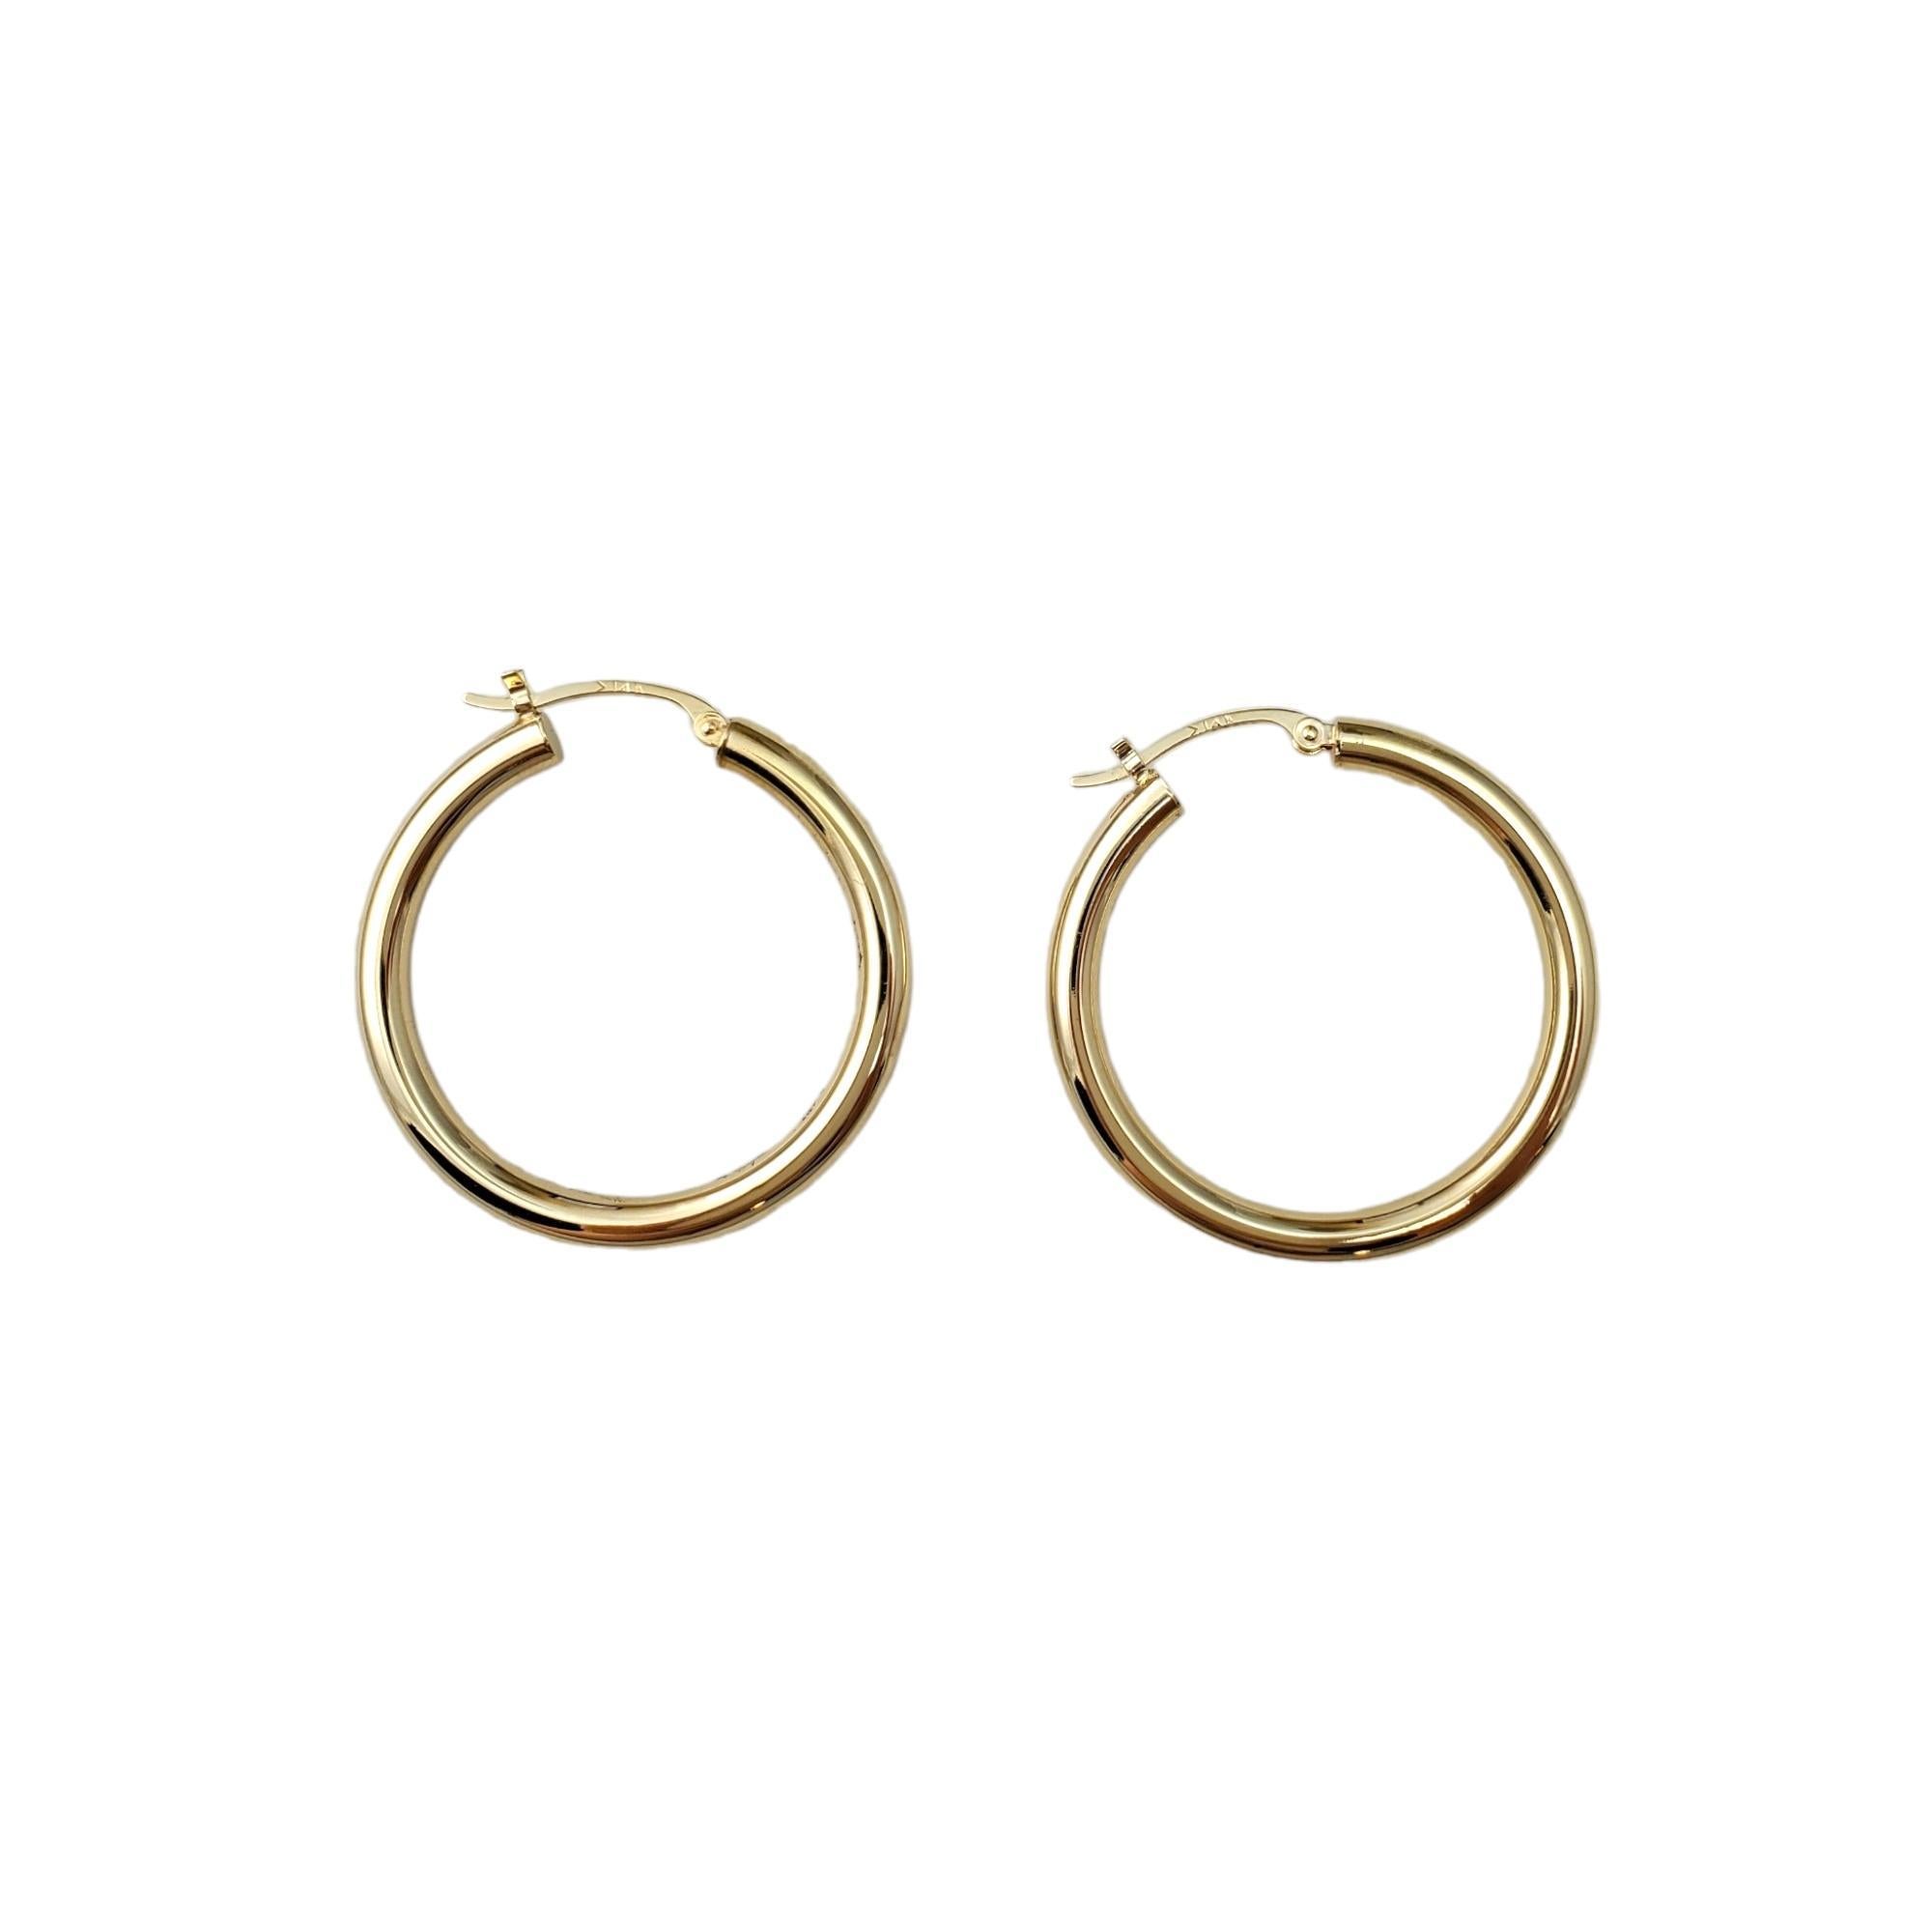 14K Yellow Gold Circle Hoop Earrings -

These classic hoop earrings are a beautiful addition to your collection.

Size:  31.3 mm X 31.7mm 3.1 mm

Hang approx. 1 1/4